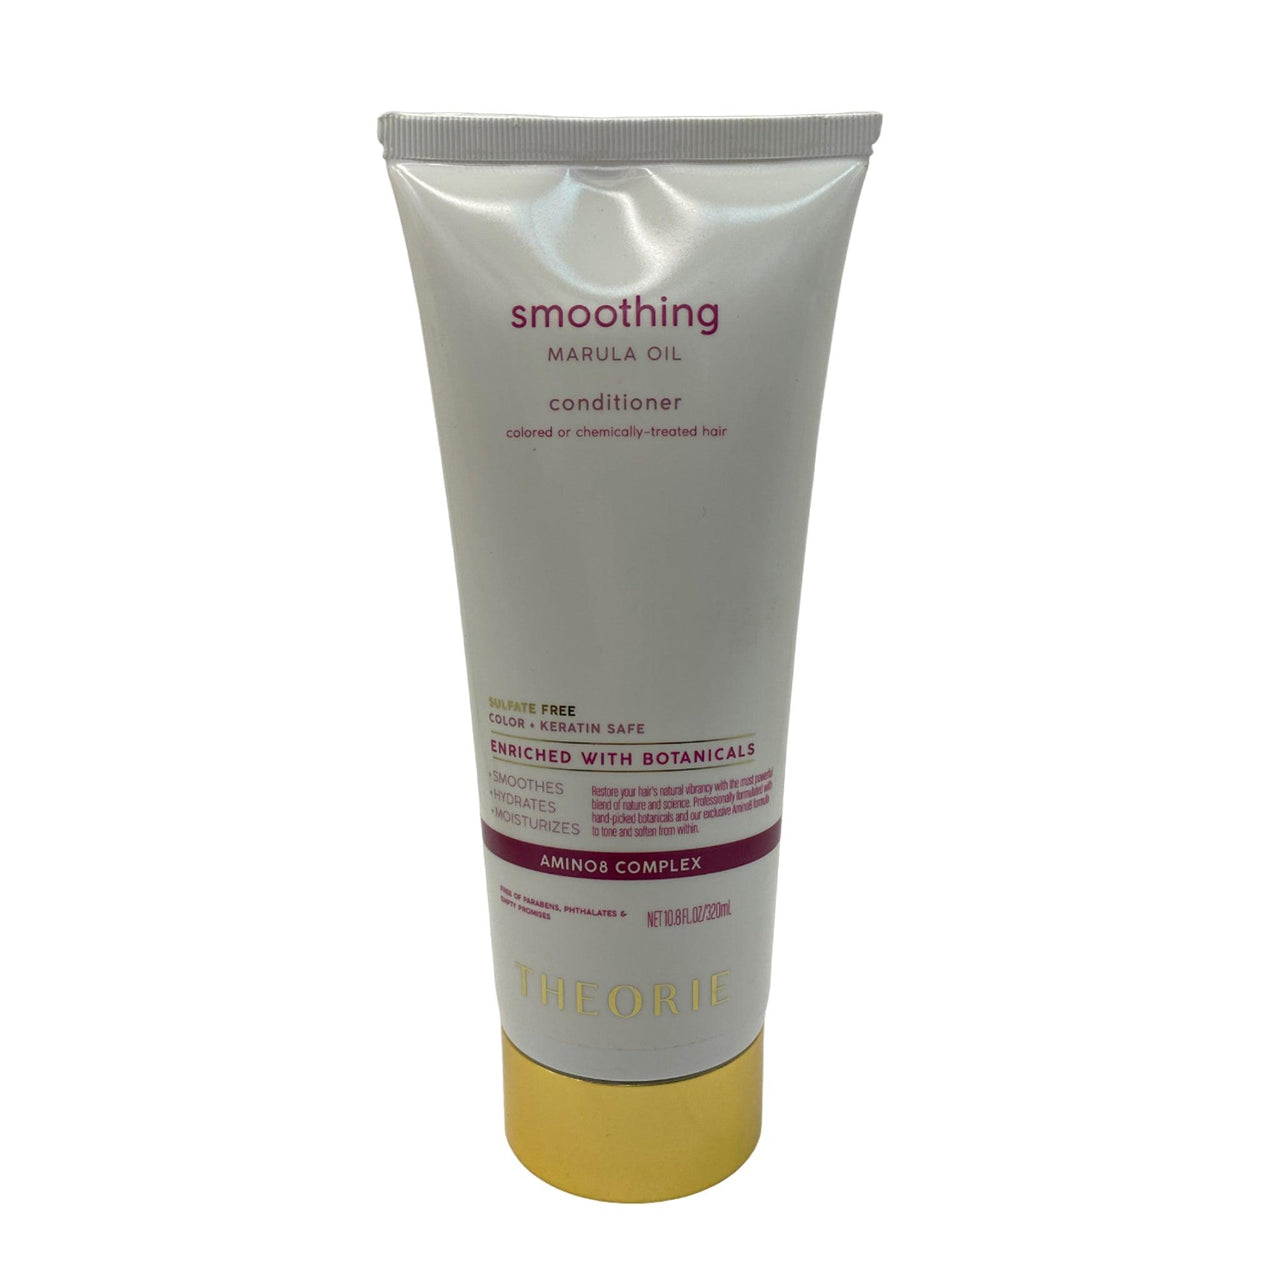 Theorie Smoothing Marula Oil Conditioner Enriched with Botanicals (48 Pcs Box) - Discount Wholesalers Inc